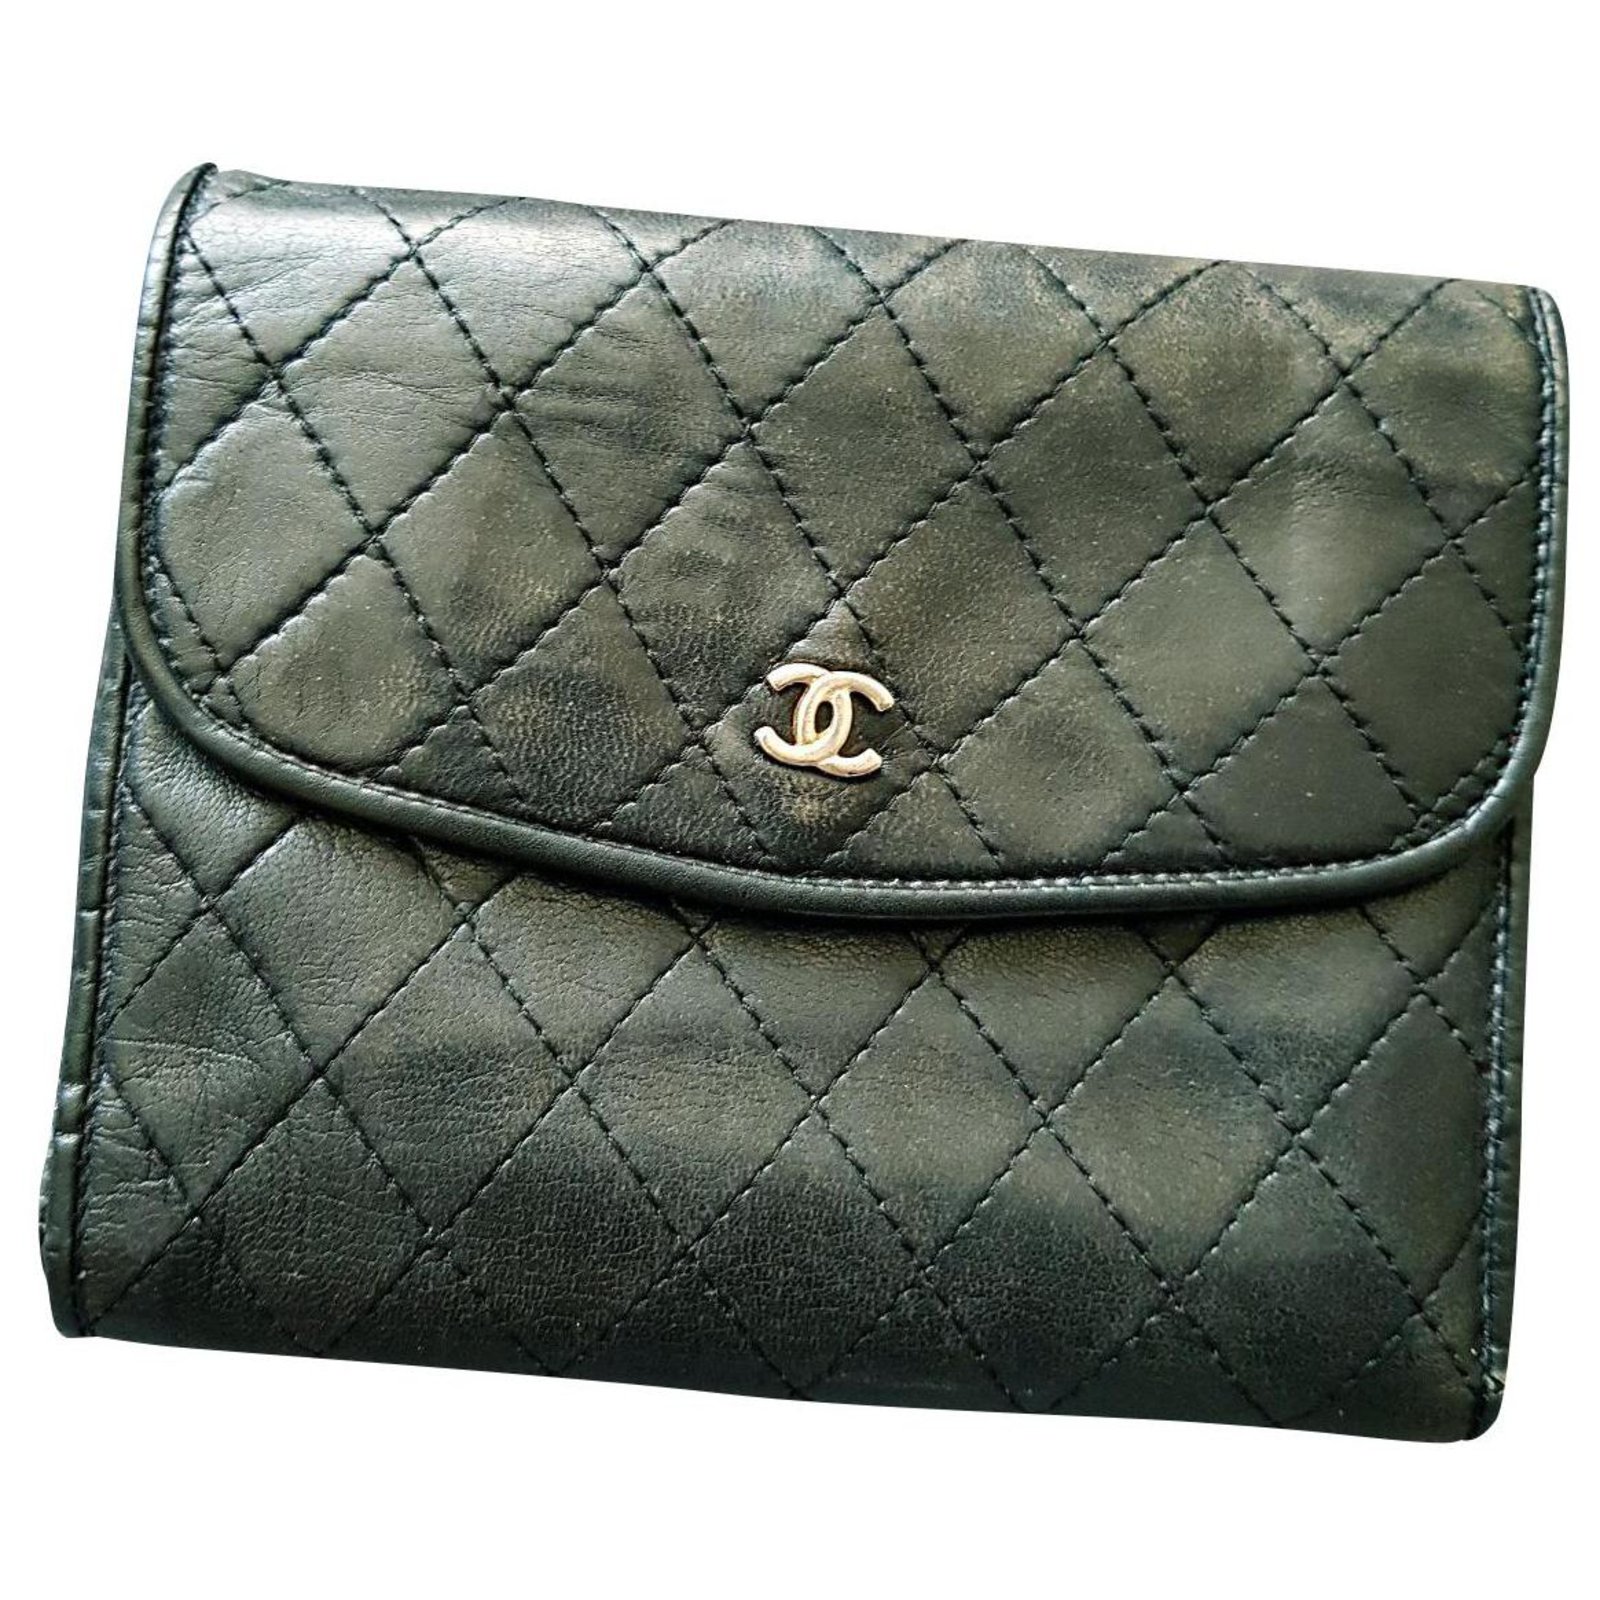 Small leather goods  Classics  Fashion  CHANEL